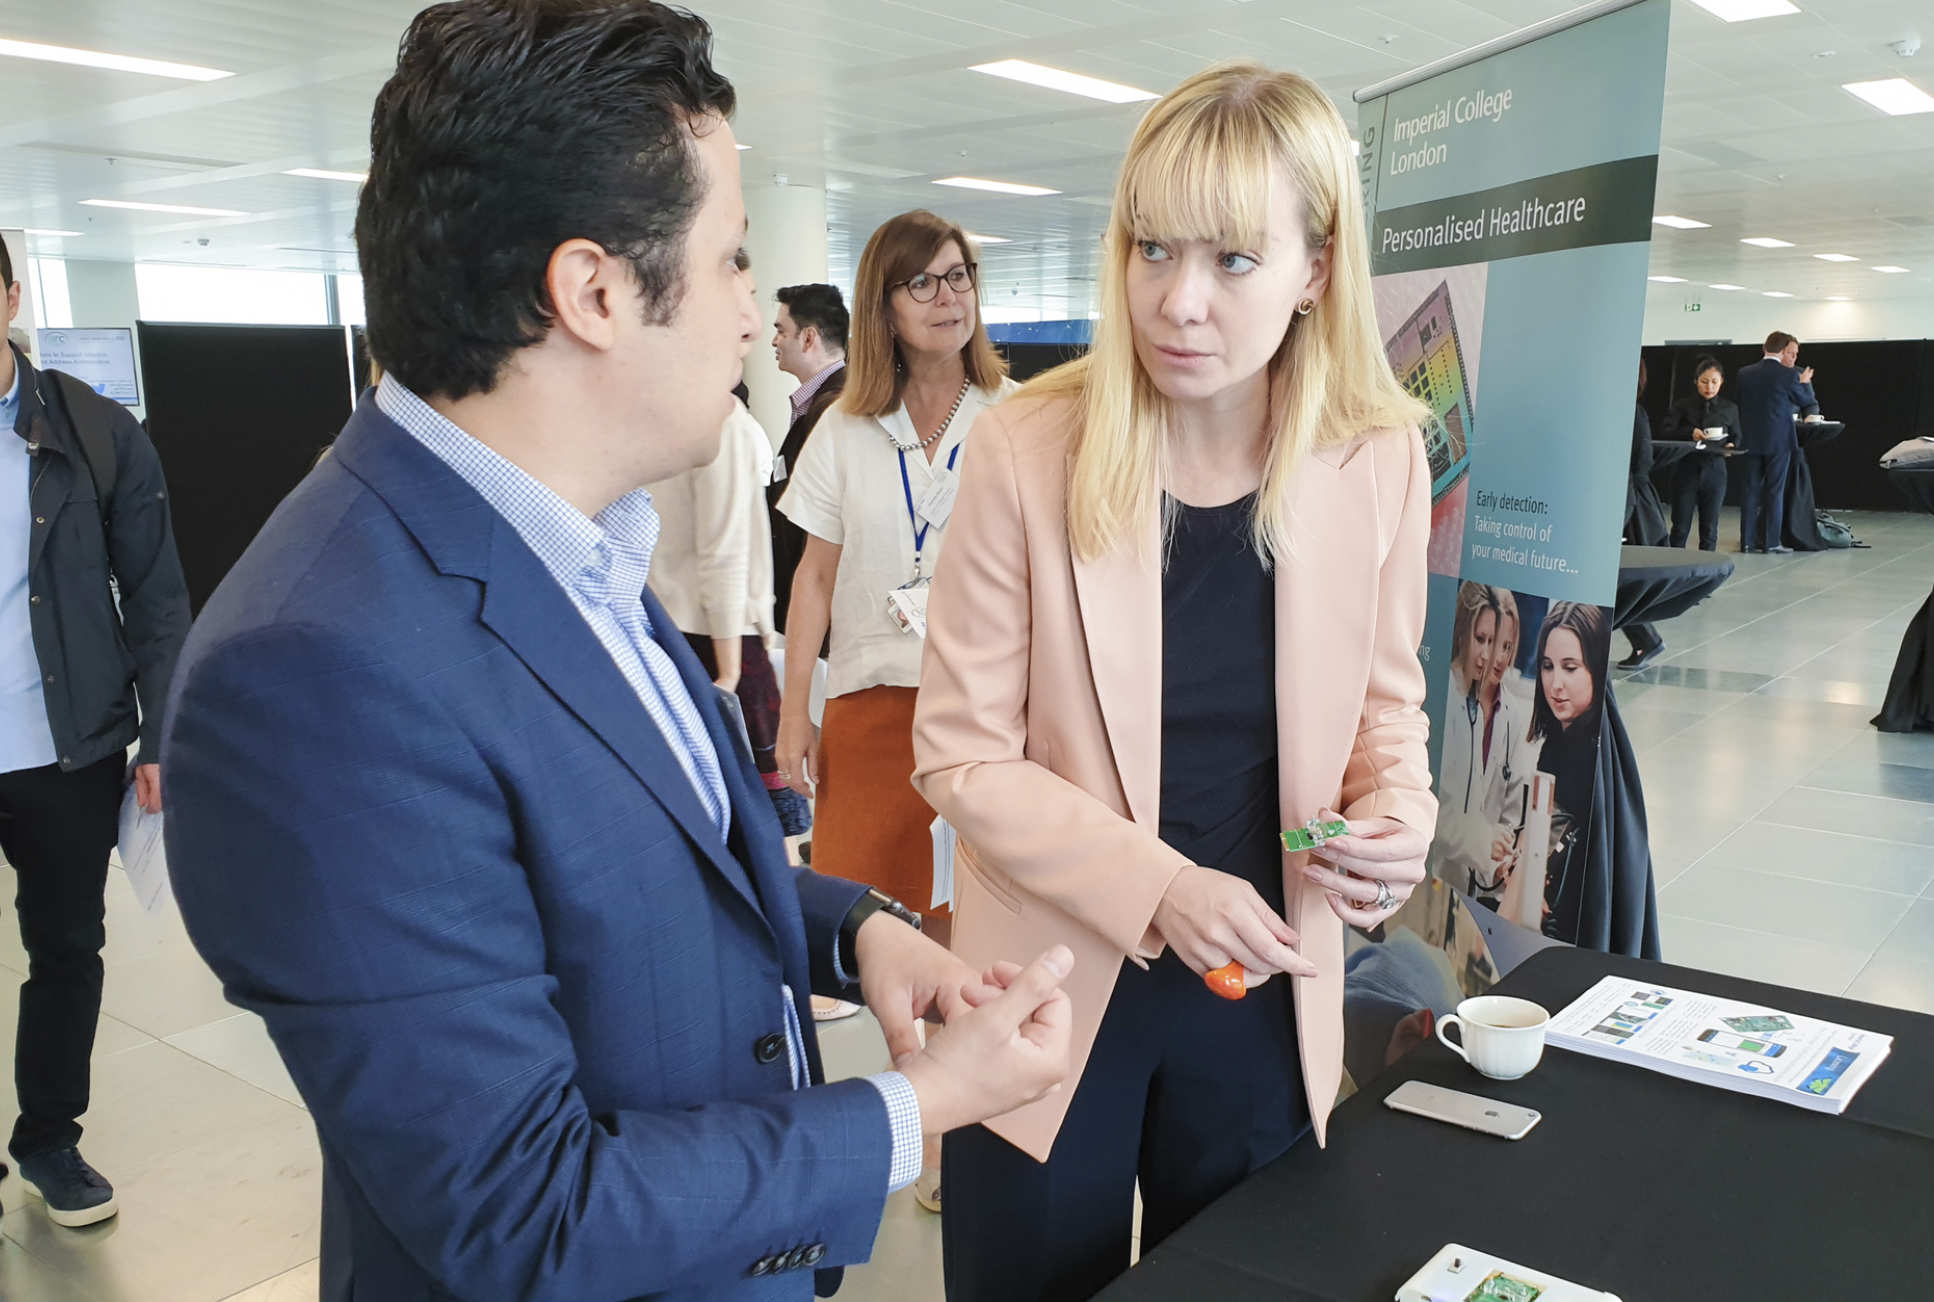 Dr Pantelis Georgiou and Baroness Blackwood discussing Lacewing, the newest iteration of rapid diagnostic microchip technology developed by Dr Georgiou's team  